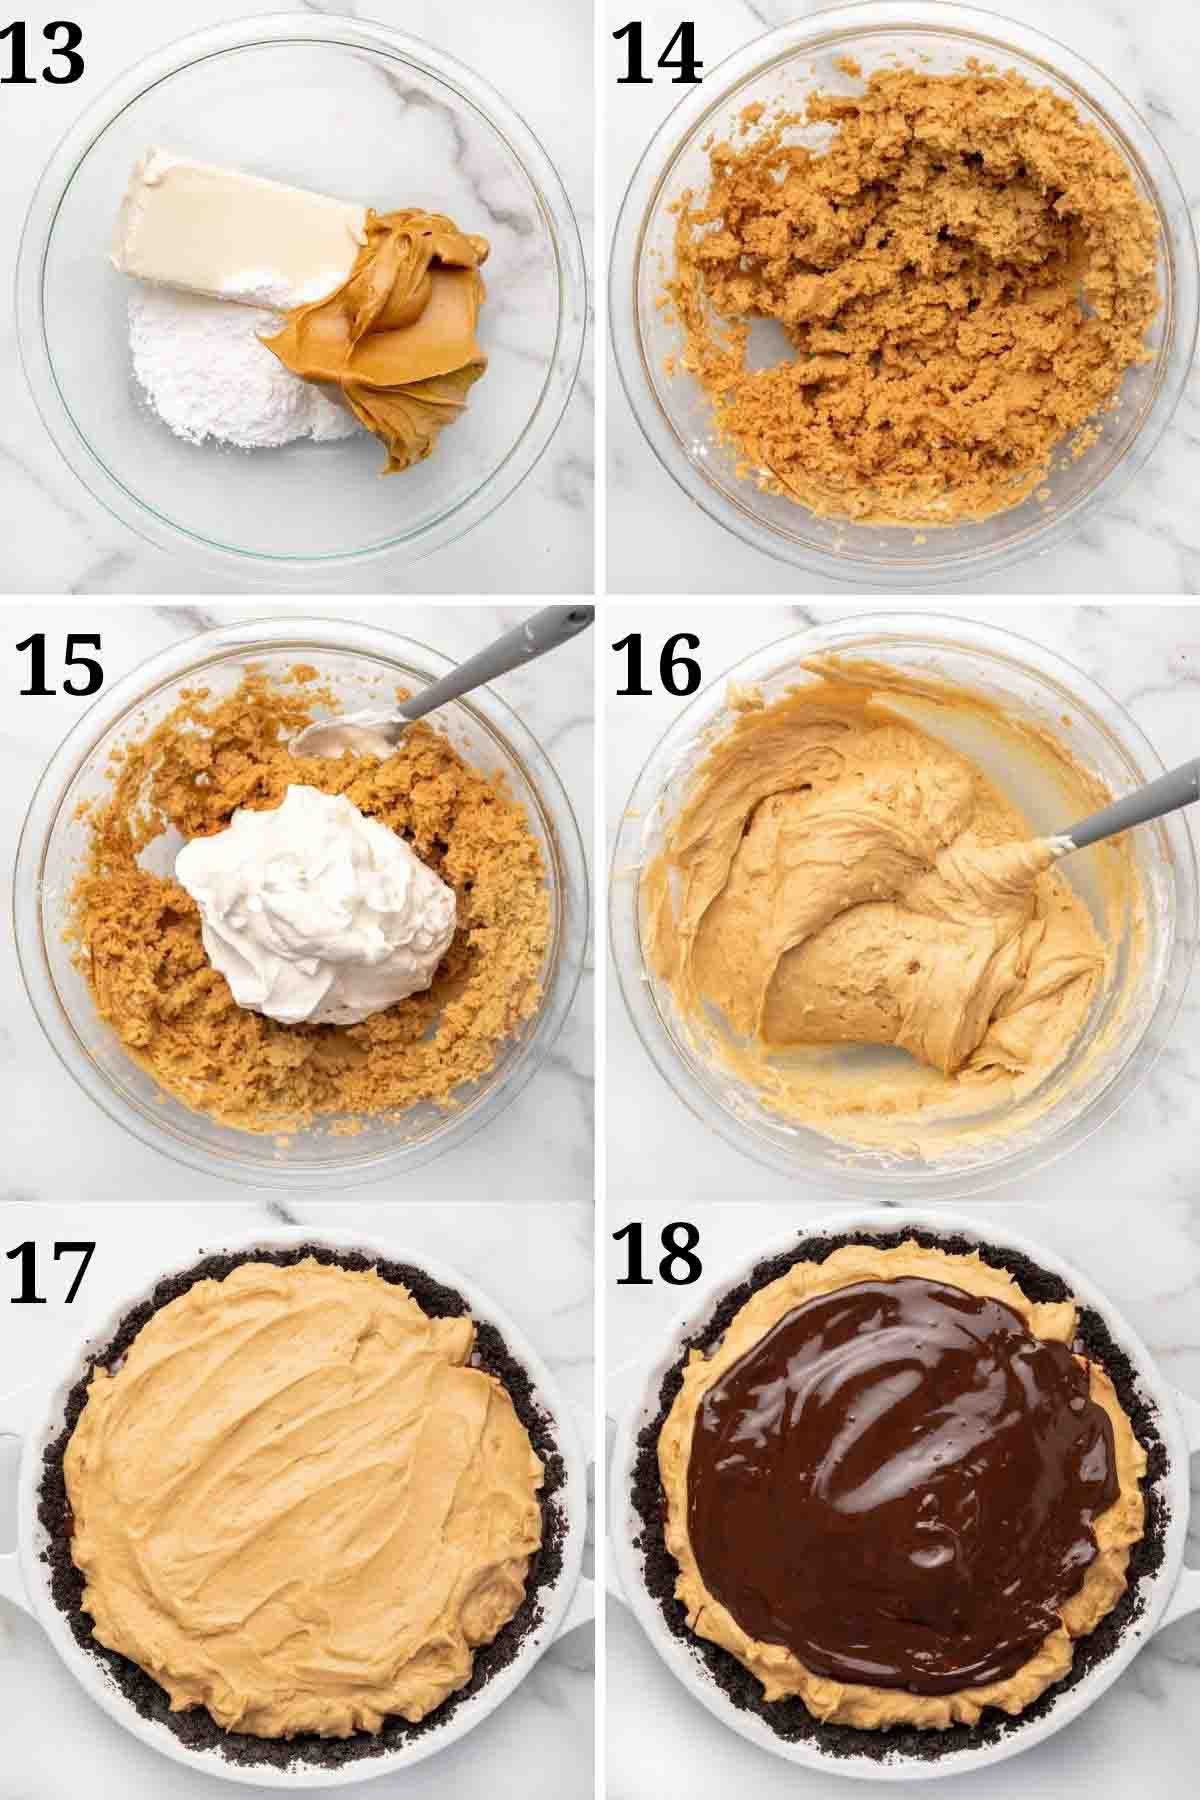 six images showing how to make a peanut butter pie.